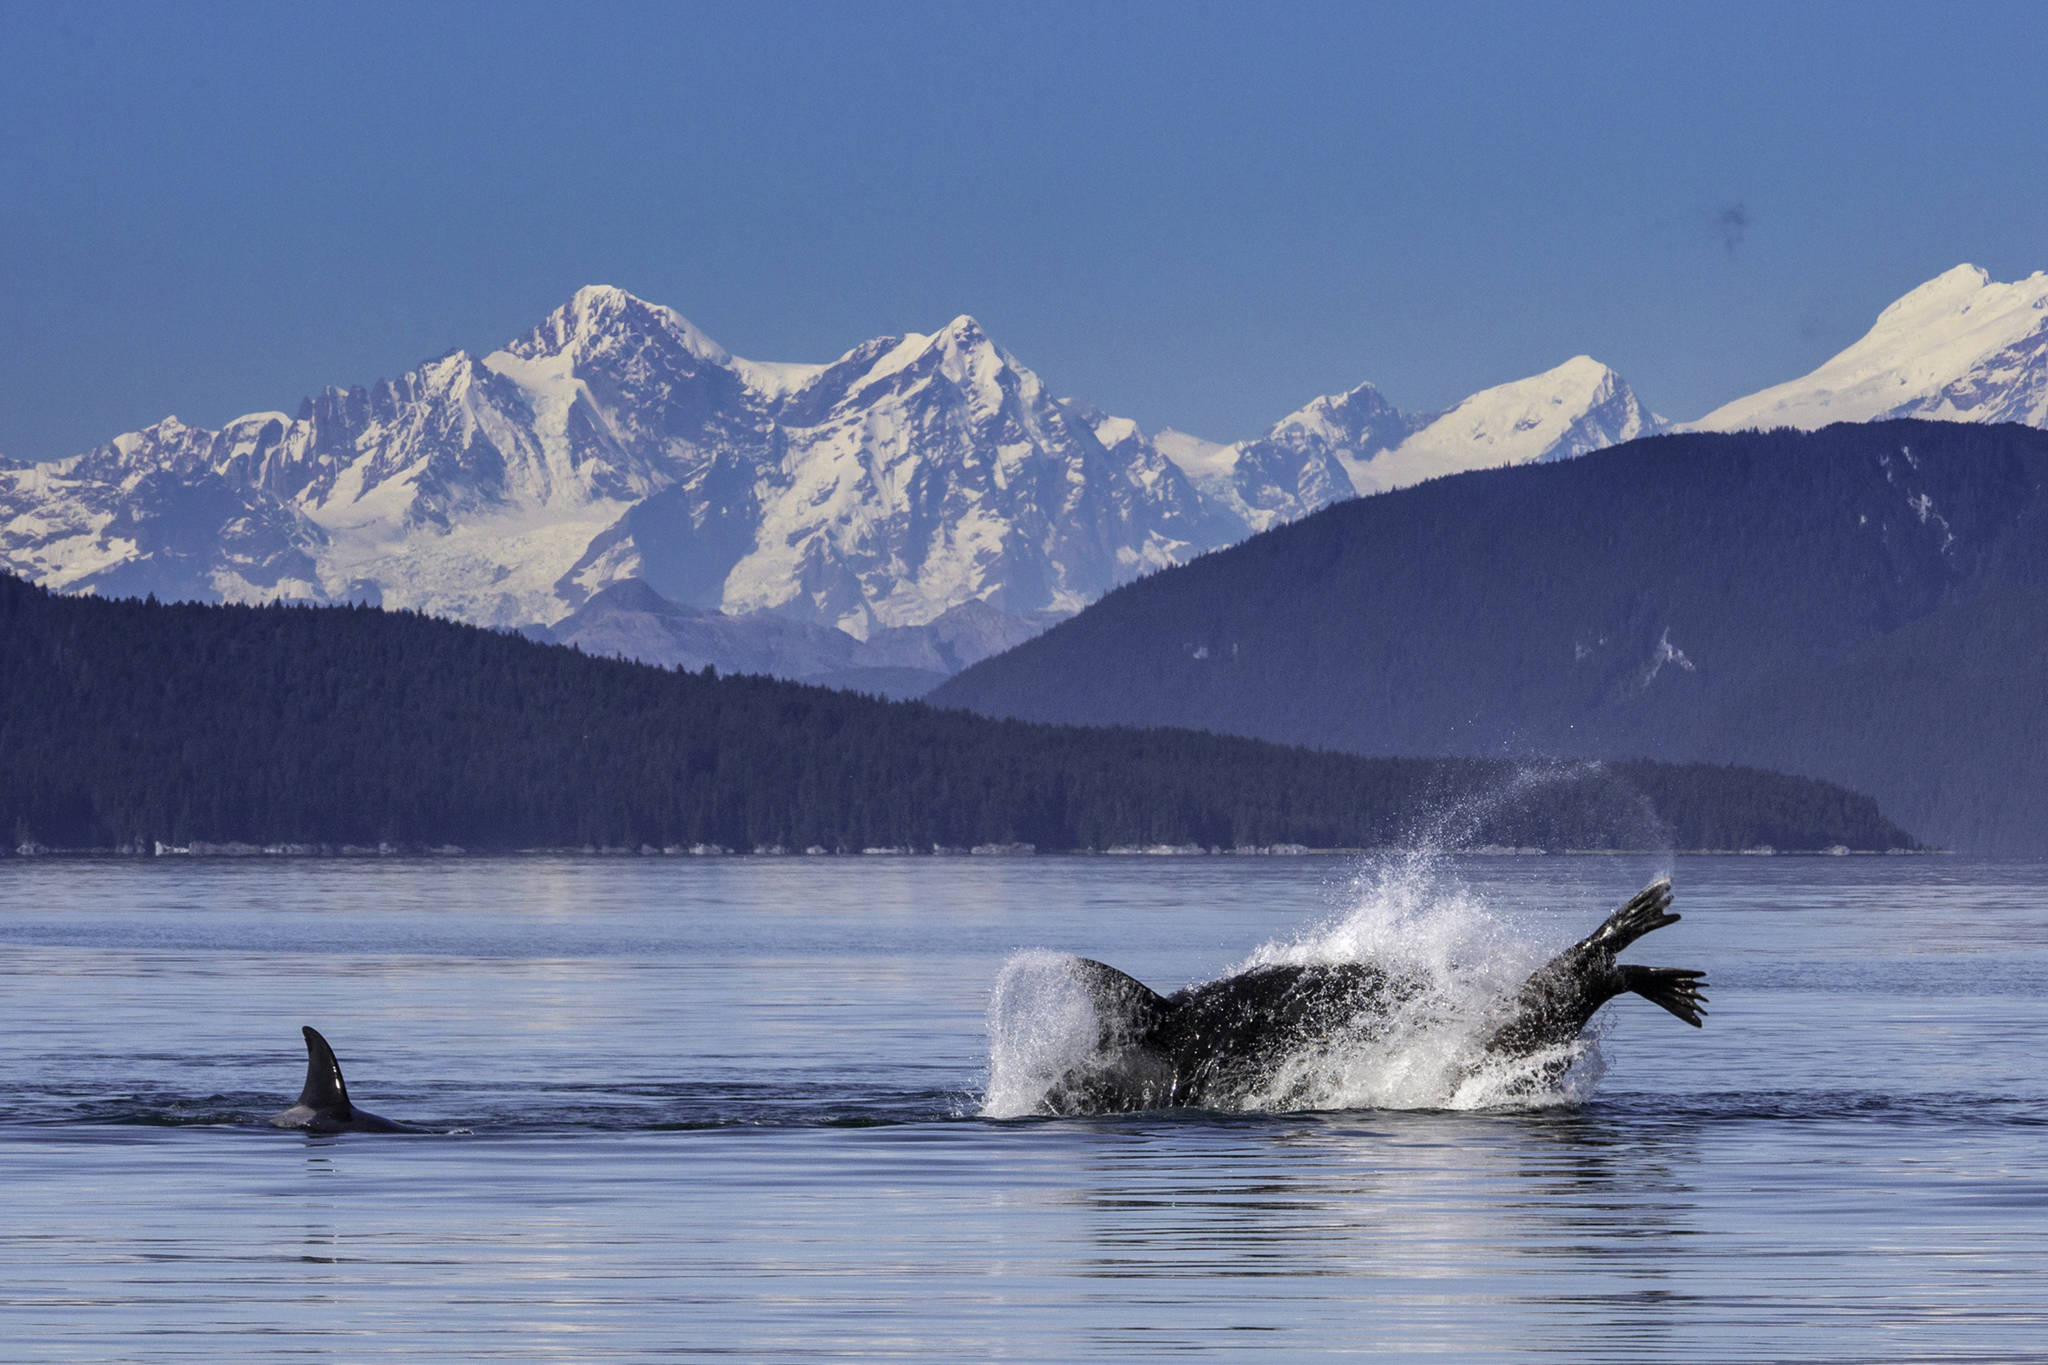 Orcas hunt a large sea lion in Icy Strait on Sept. 10. (Courtesy Photo / Jack Beedle)